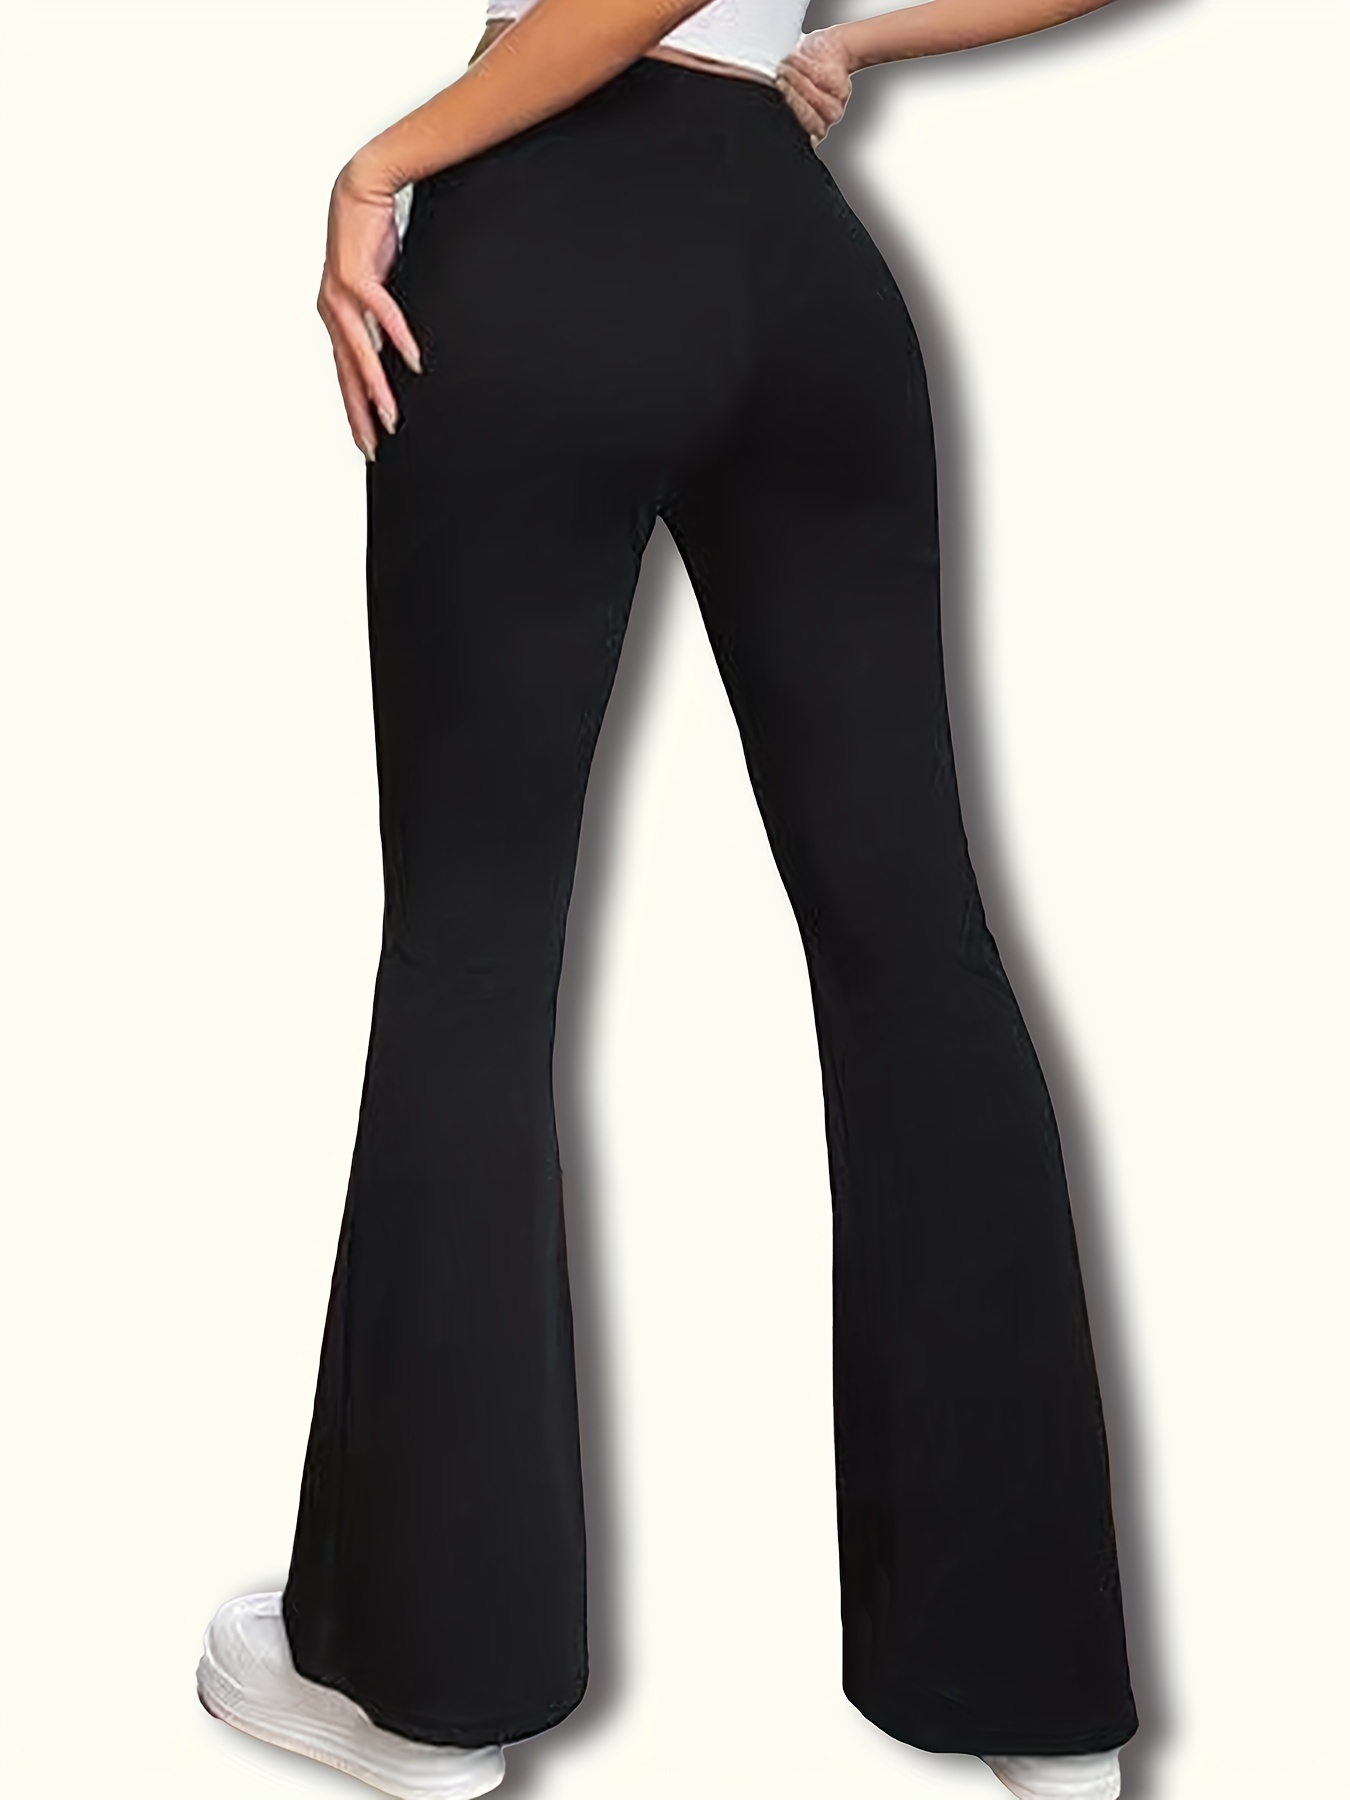 Silm Fashion Solid Black Pants For Women Clothes Casual Flare